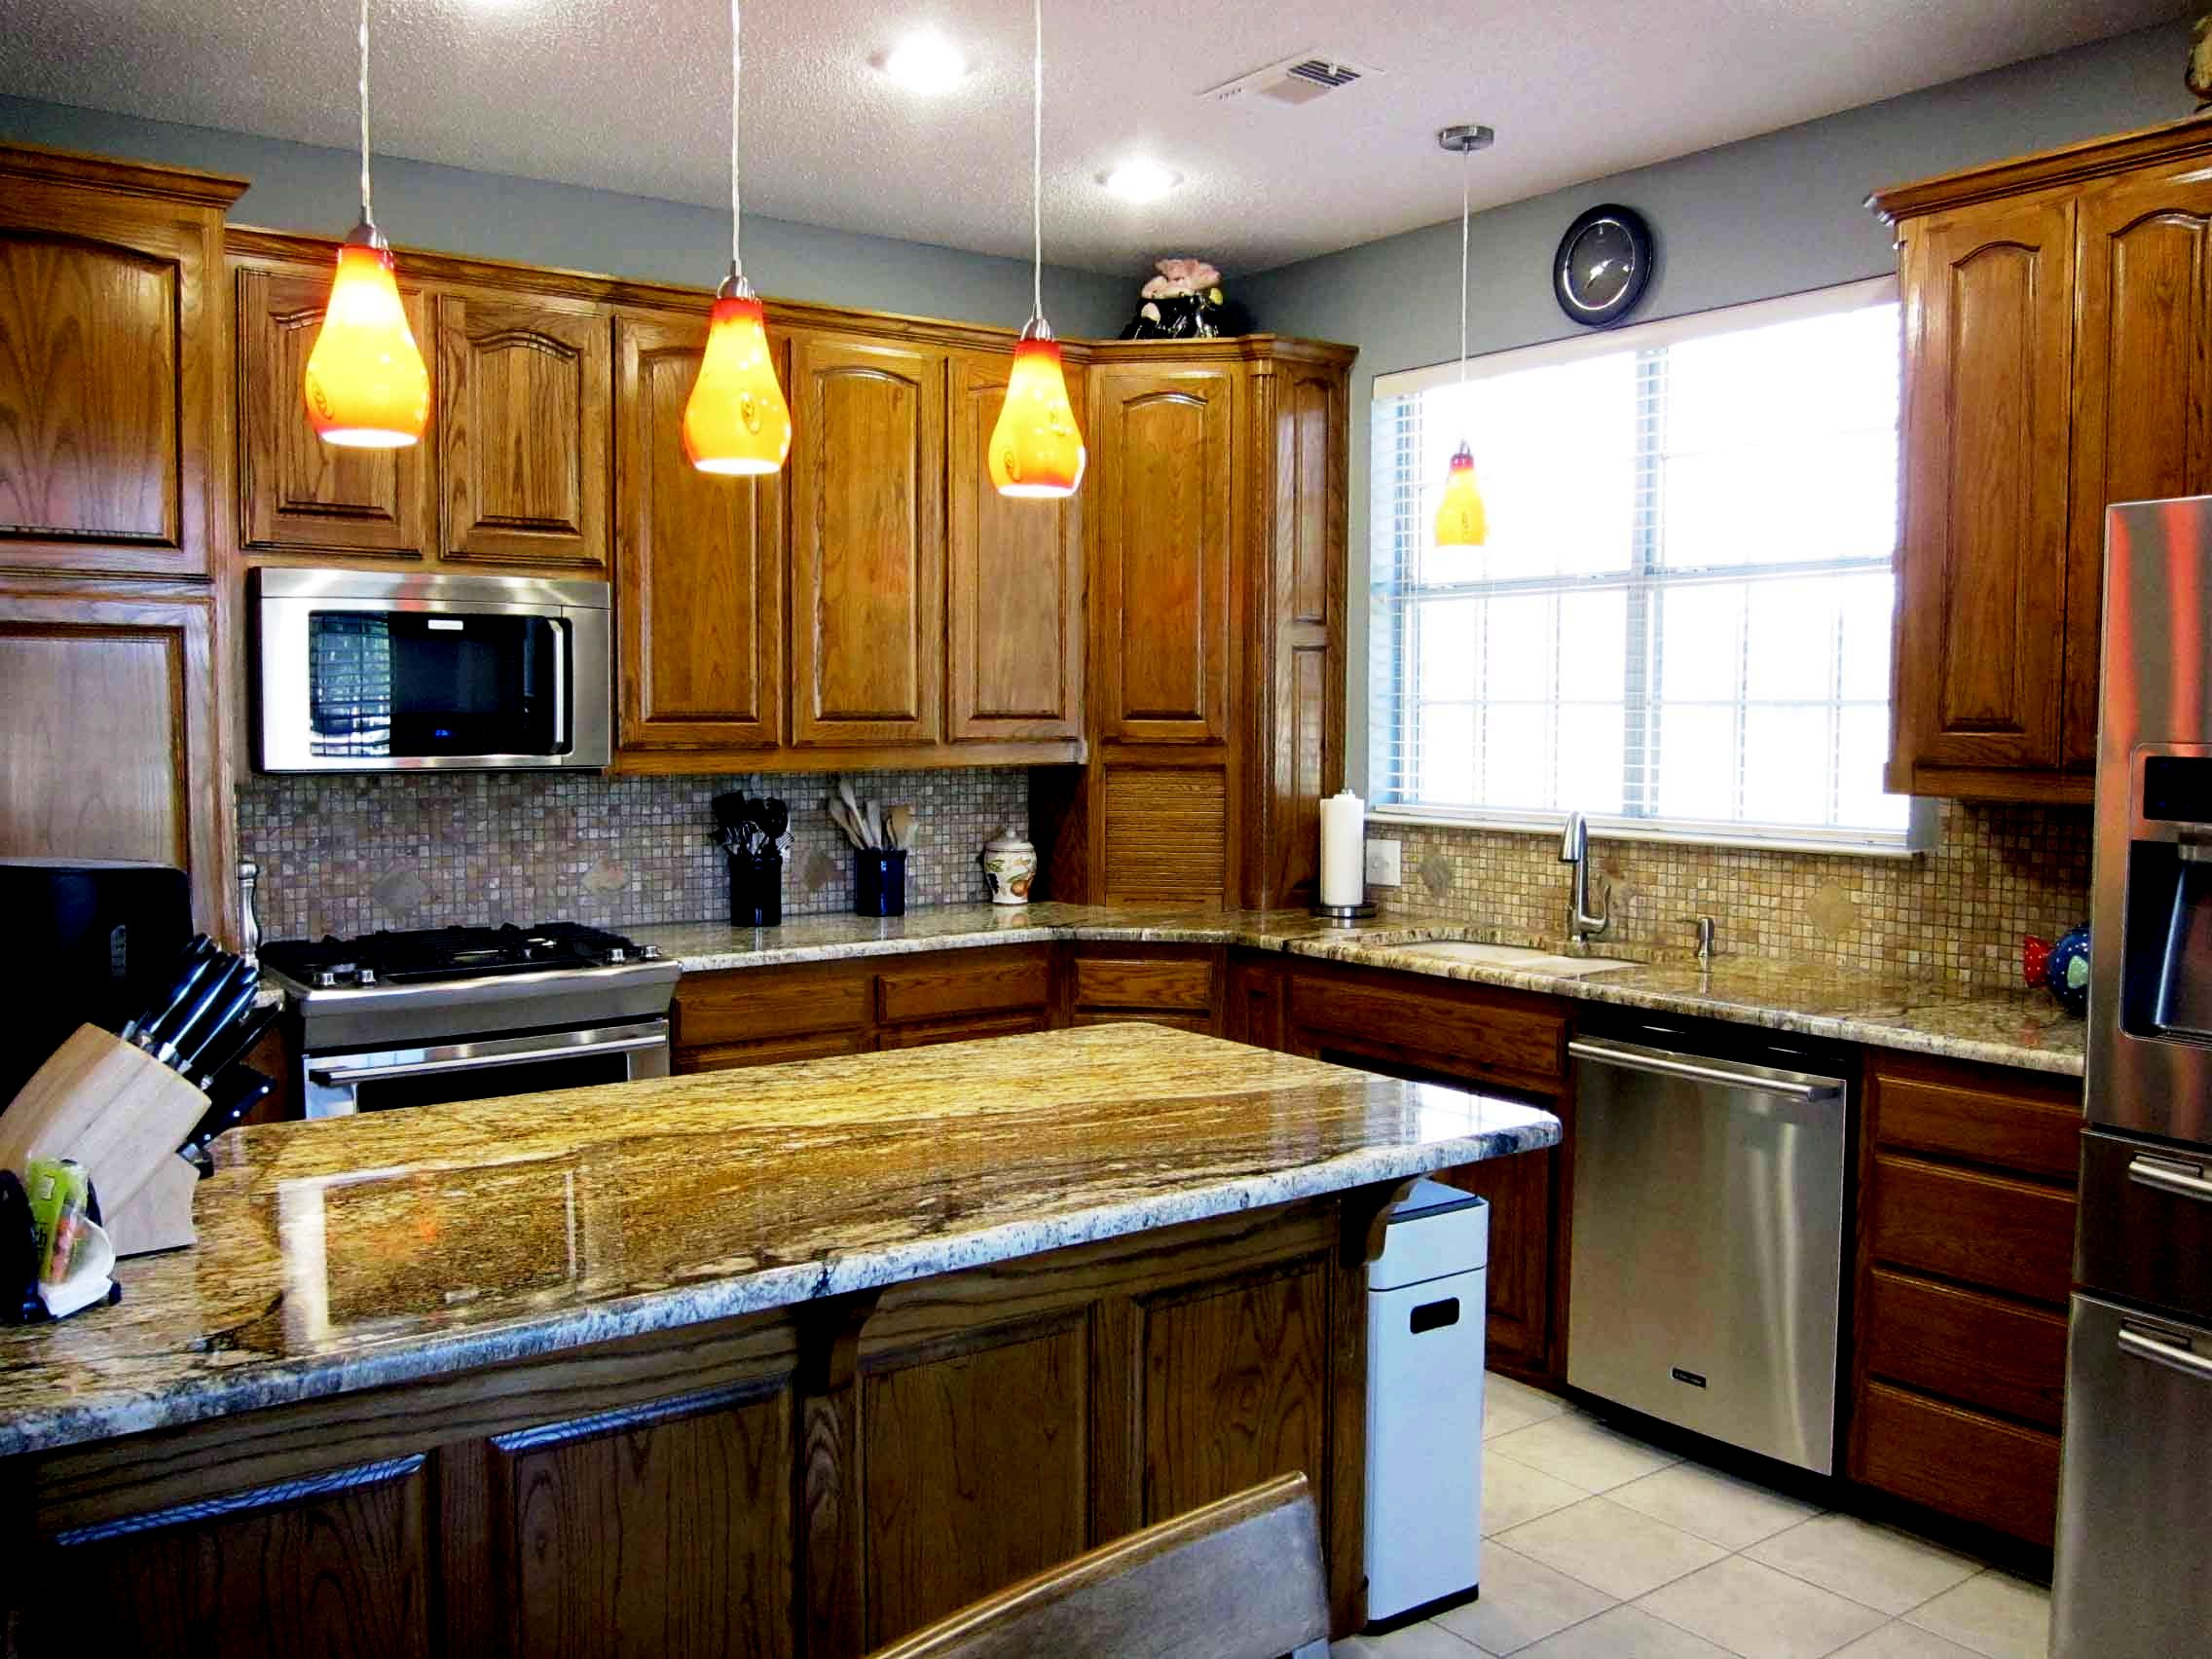 How to Choose the Right Countertops and Backsplash